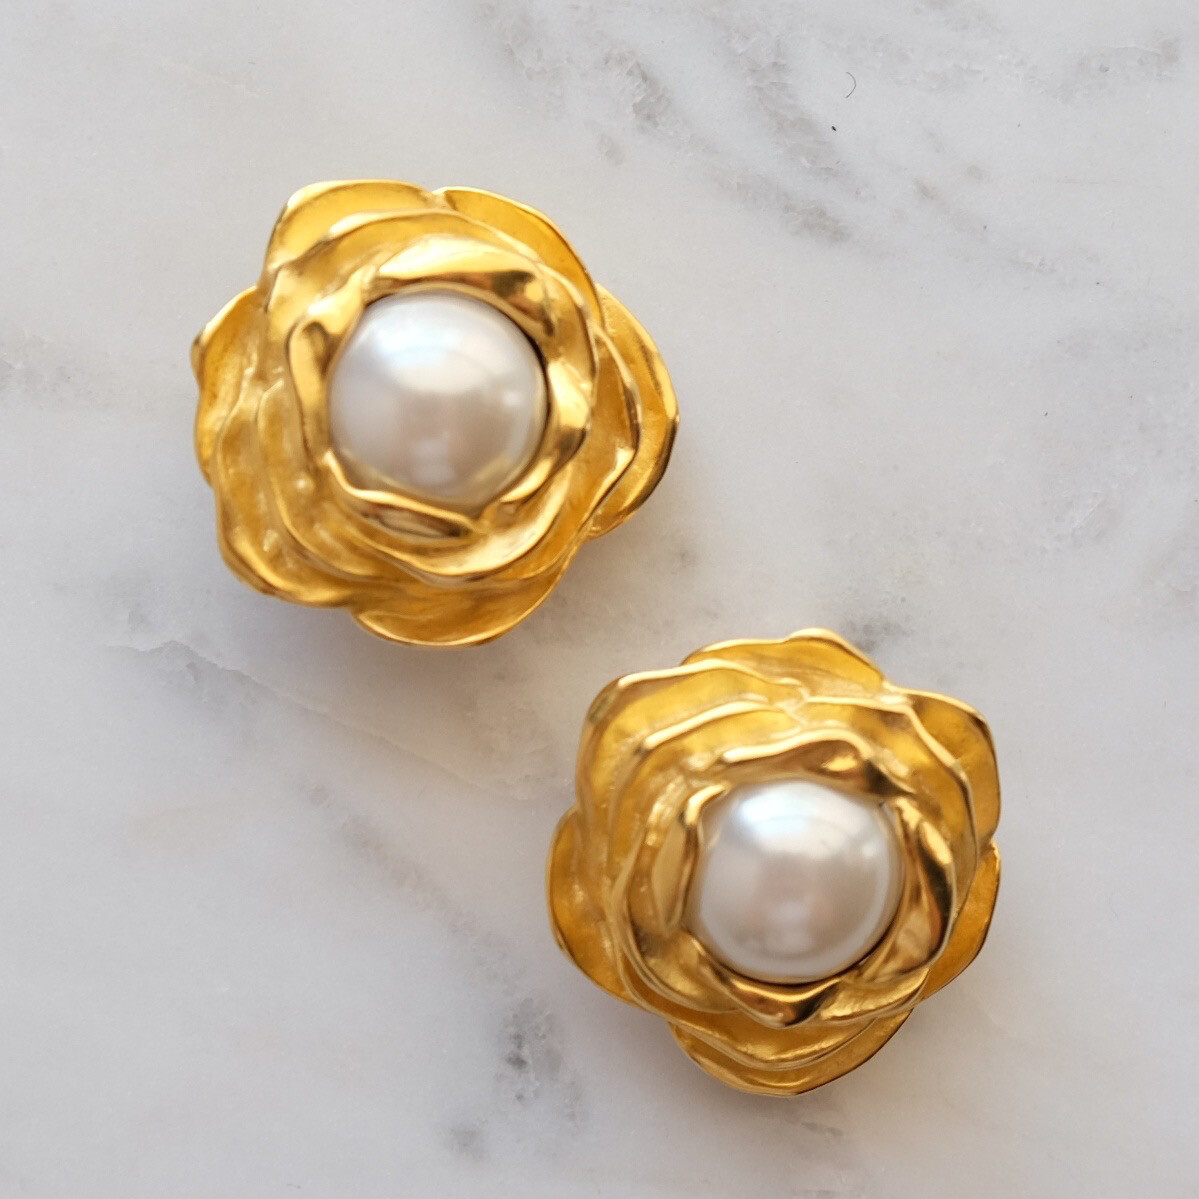 Vintage Givenchy Rose Faux Pearl Earrings 1980’s